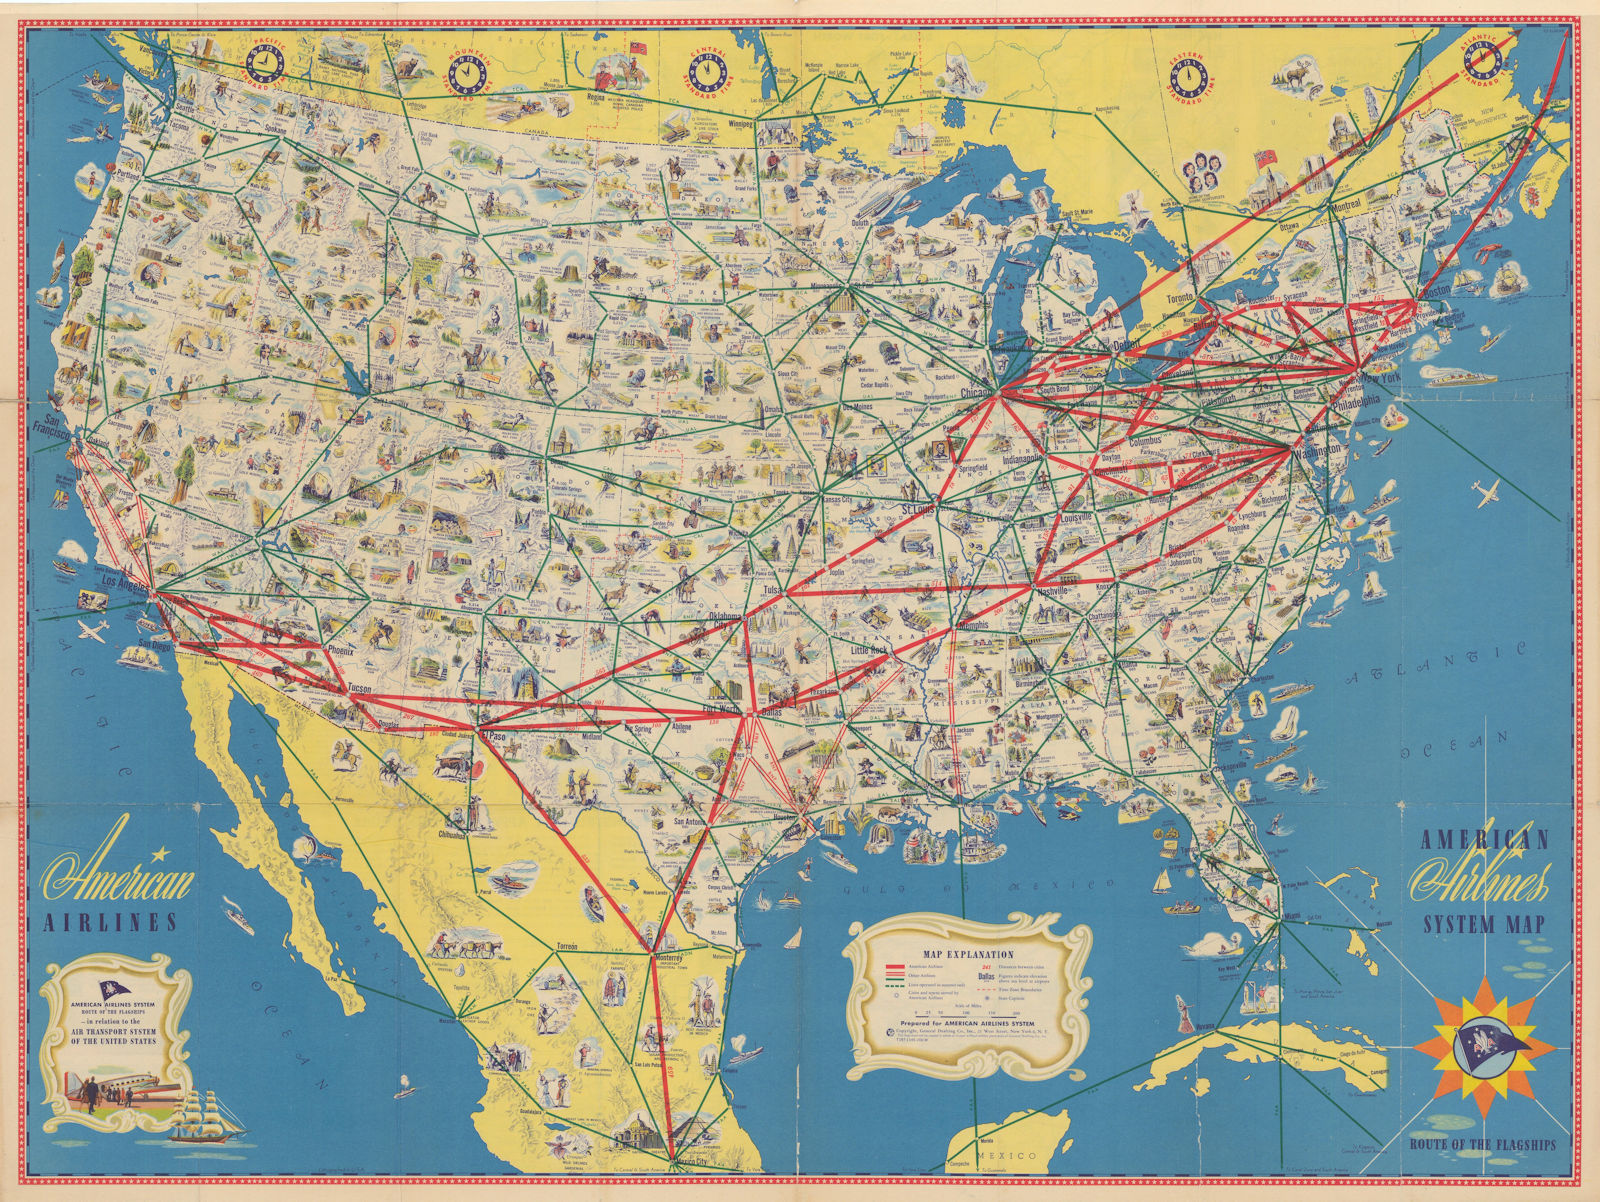 Associate Product American Airlines System Map. Route of the Flagships. Pictorial 24"x32" c1945